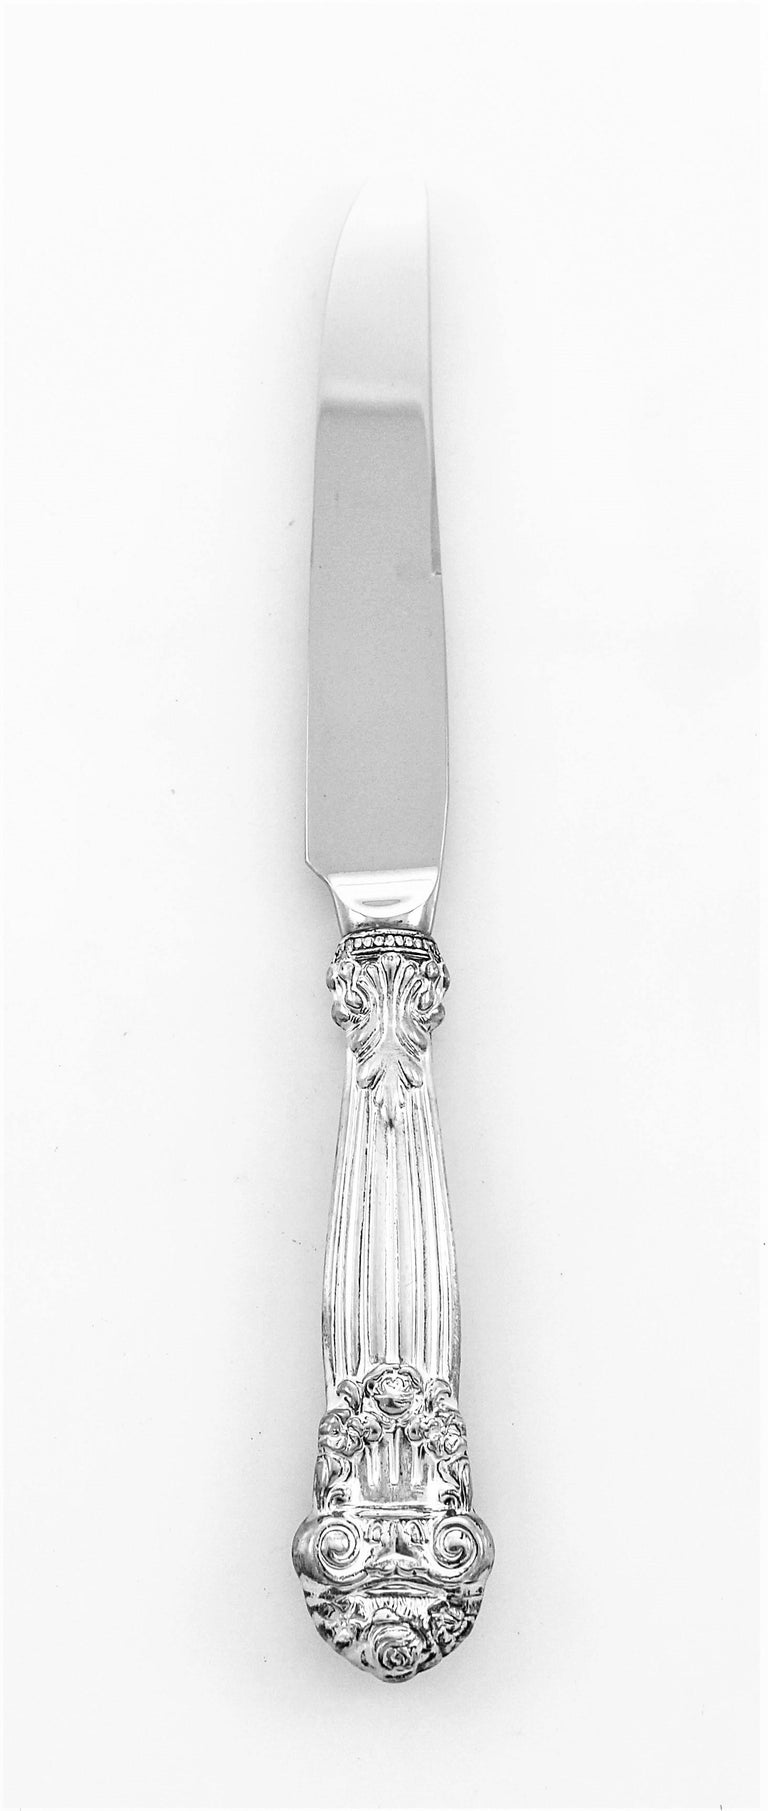 Georgian sterling silver flatware is one of those Classic patterns that never goes out of style. The floral bouquets on the tip of the handles and the intricate details in each piece — see salad fork tines. Start creating family and holiday memories